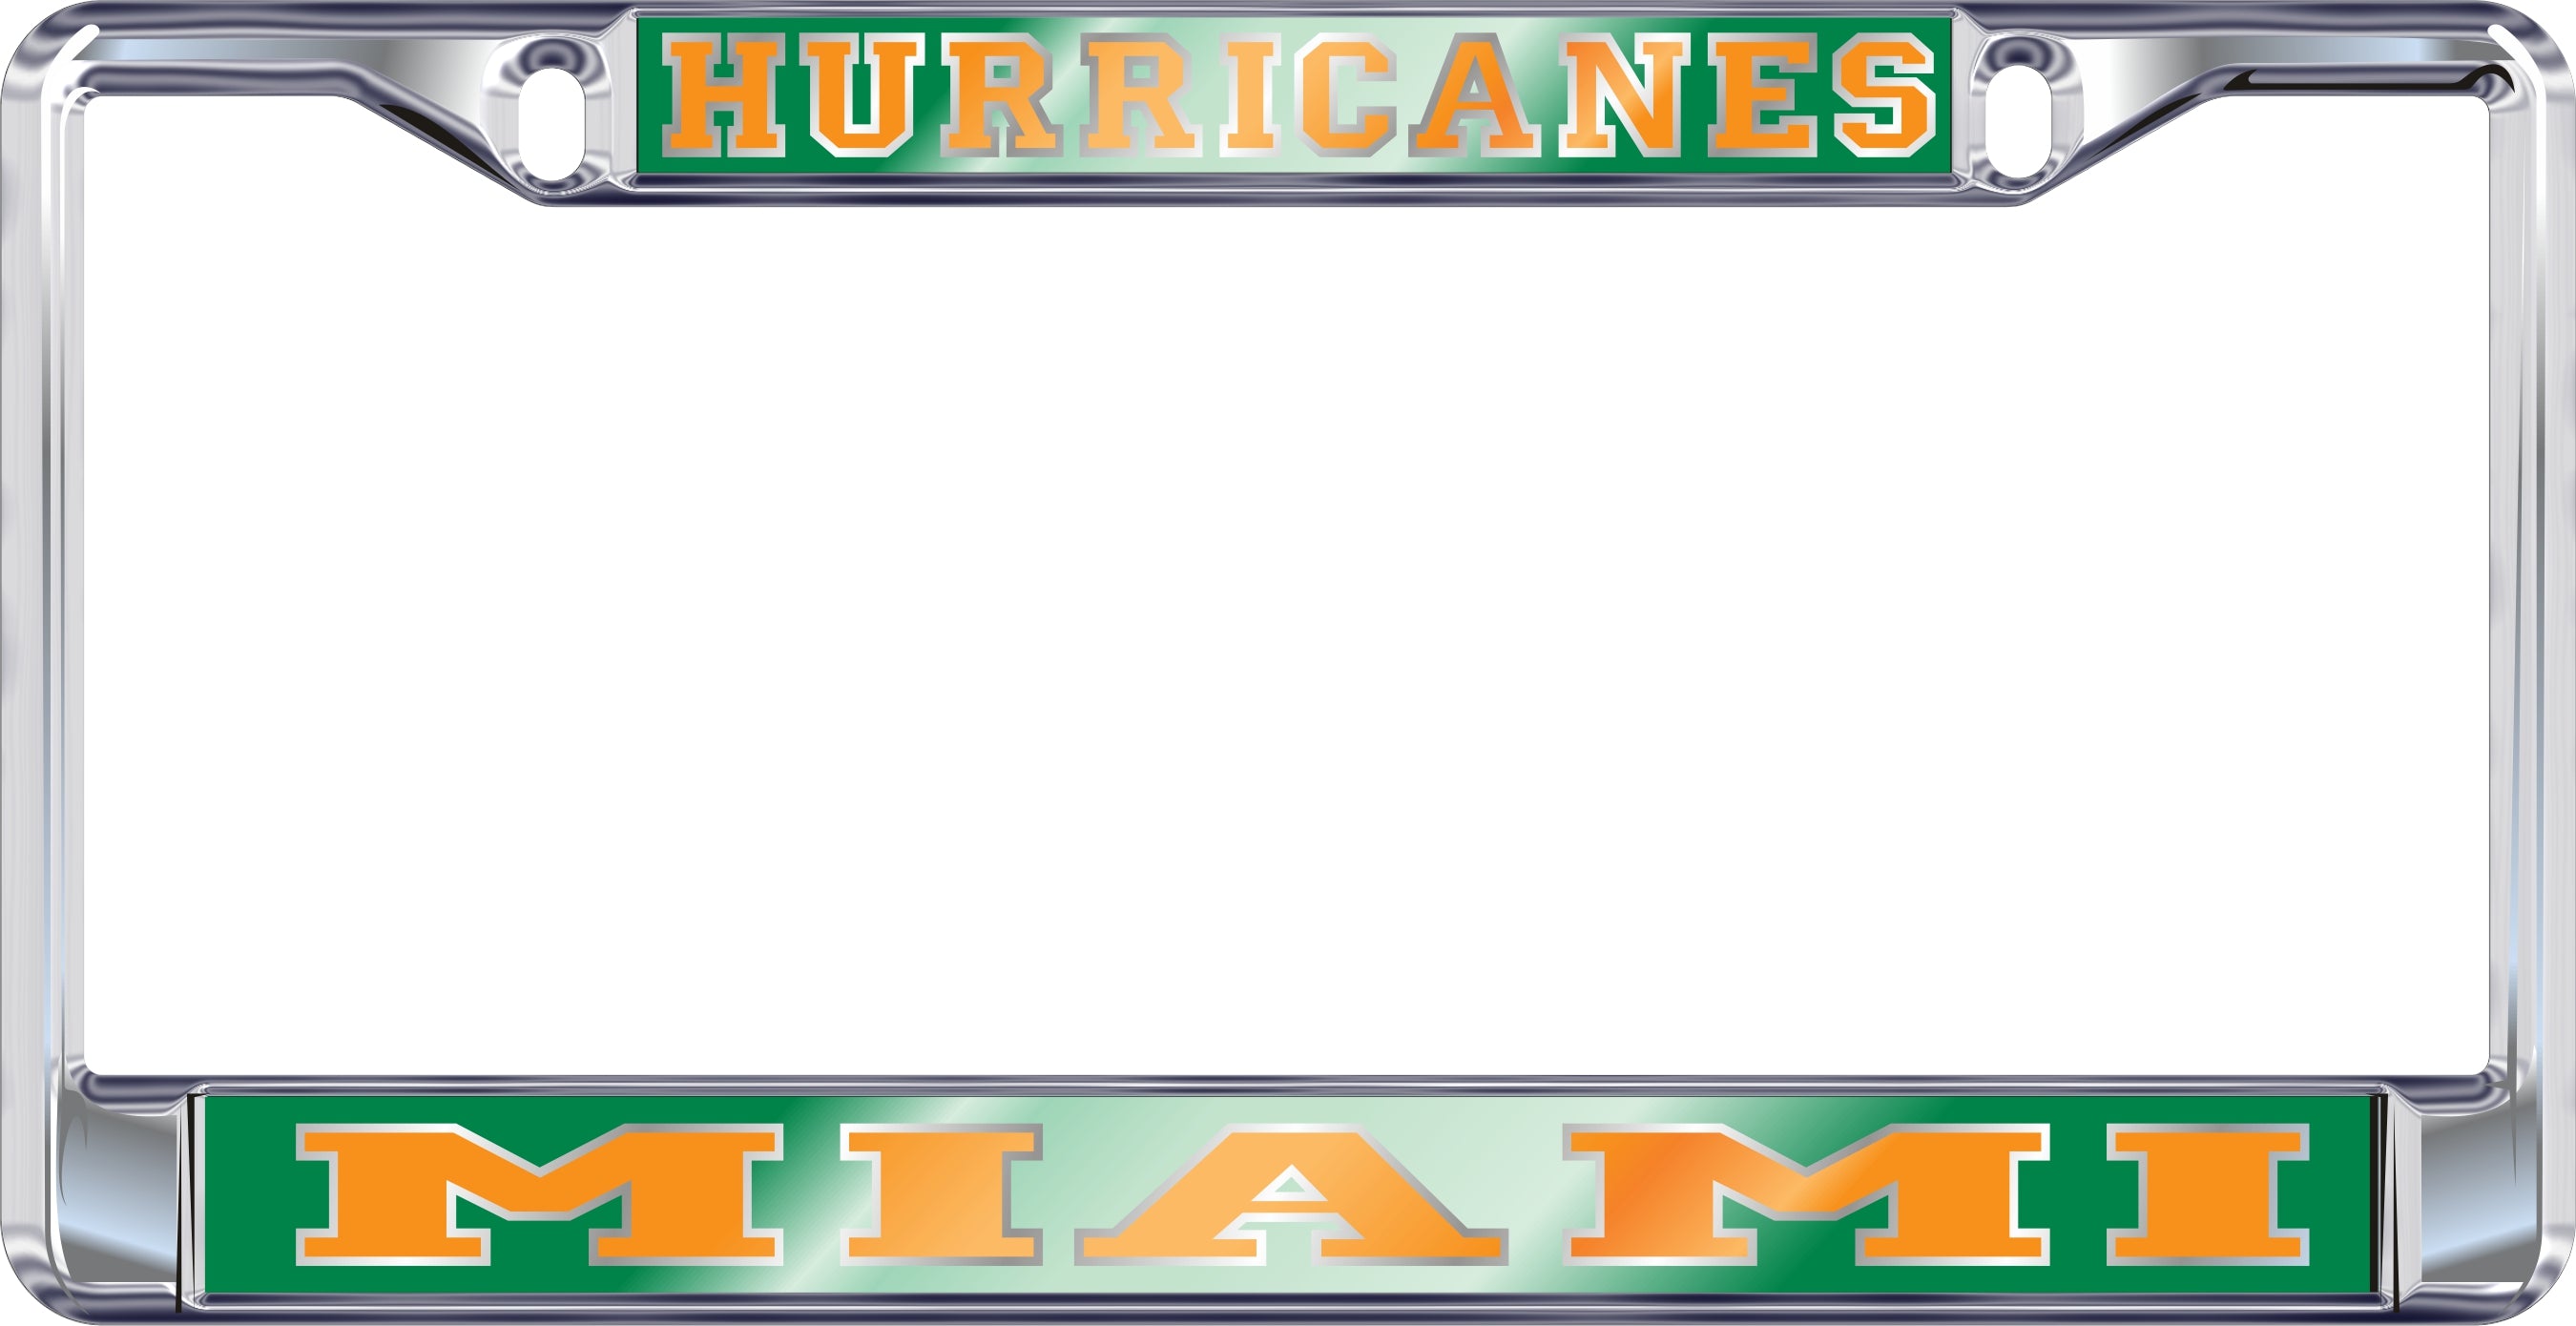 Miami Hurricanes Metal License Plate Frame Domed Mirror Finish - Silver